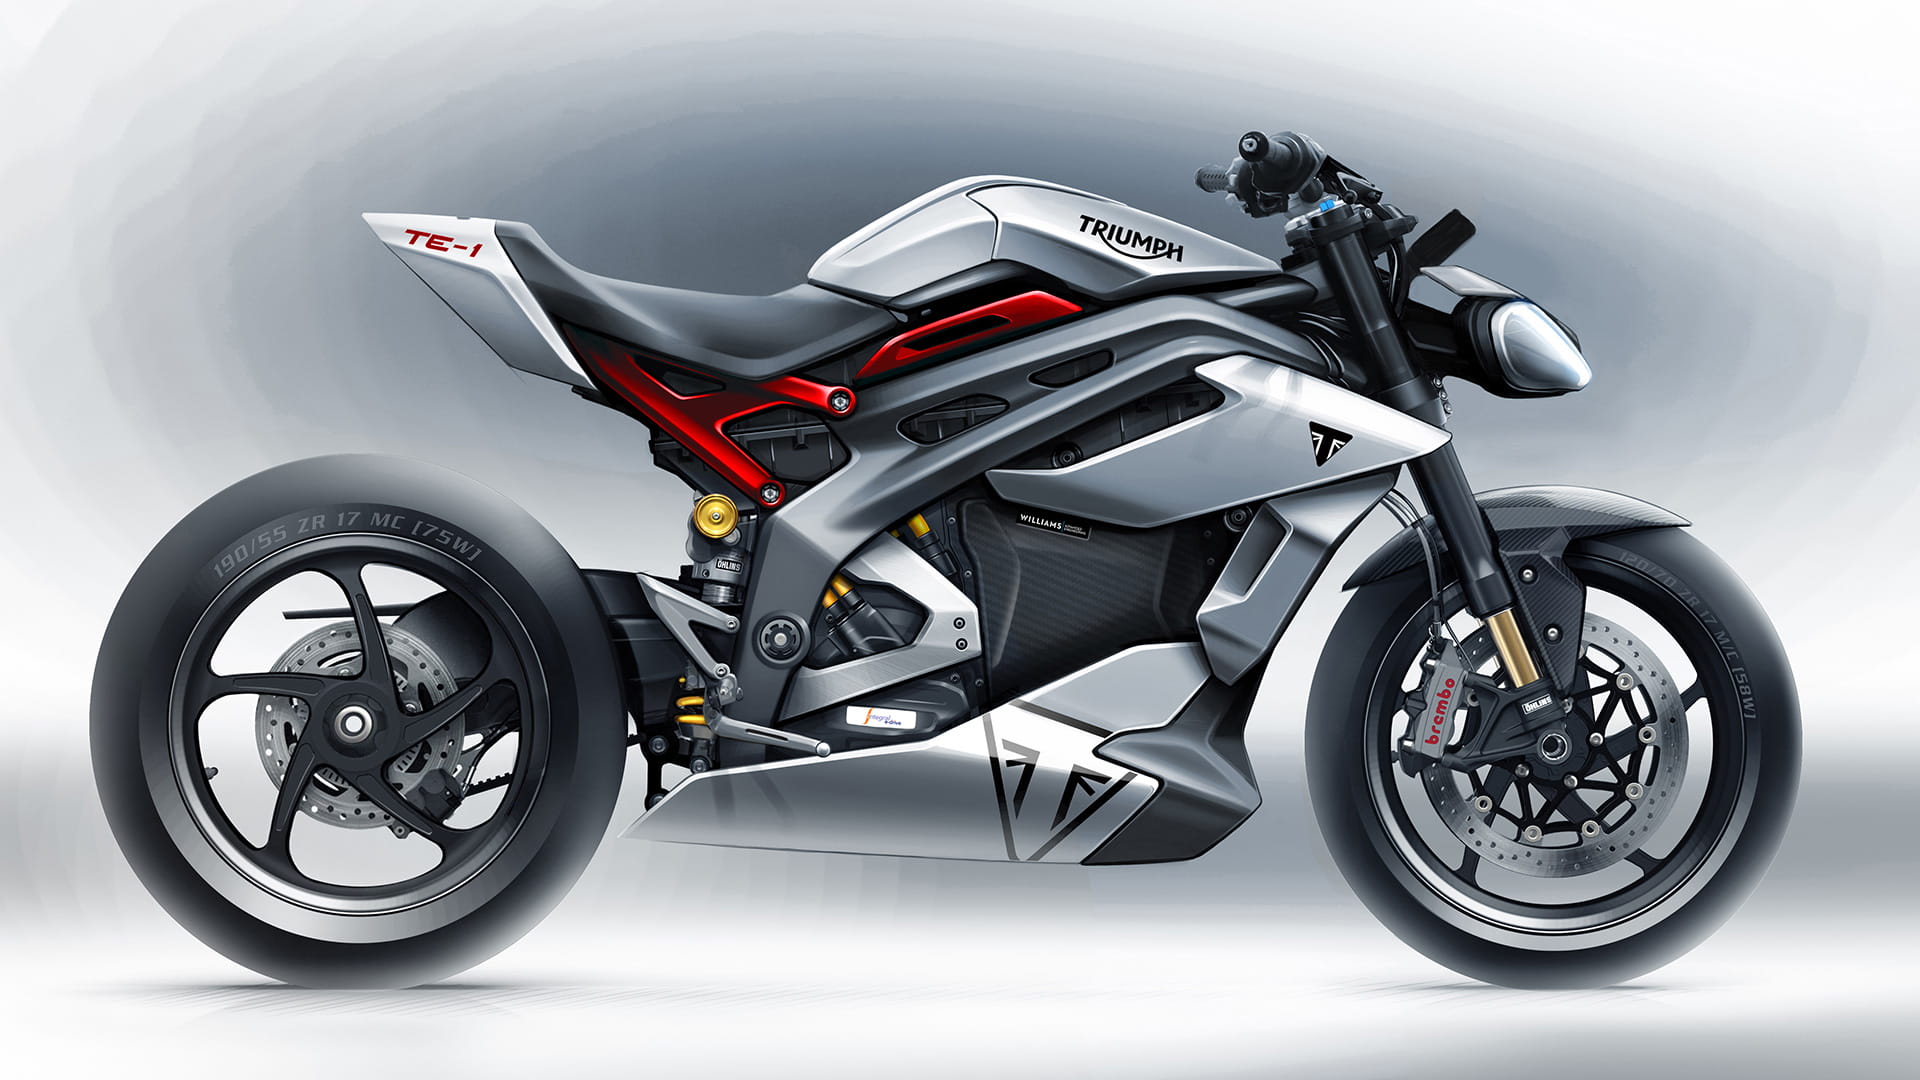 Project Triumph TE1 - Prototype electric motorcycle sketches